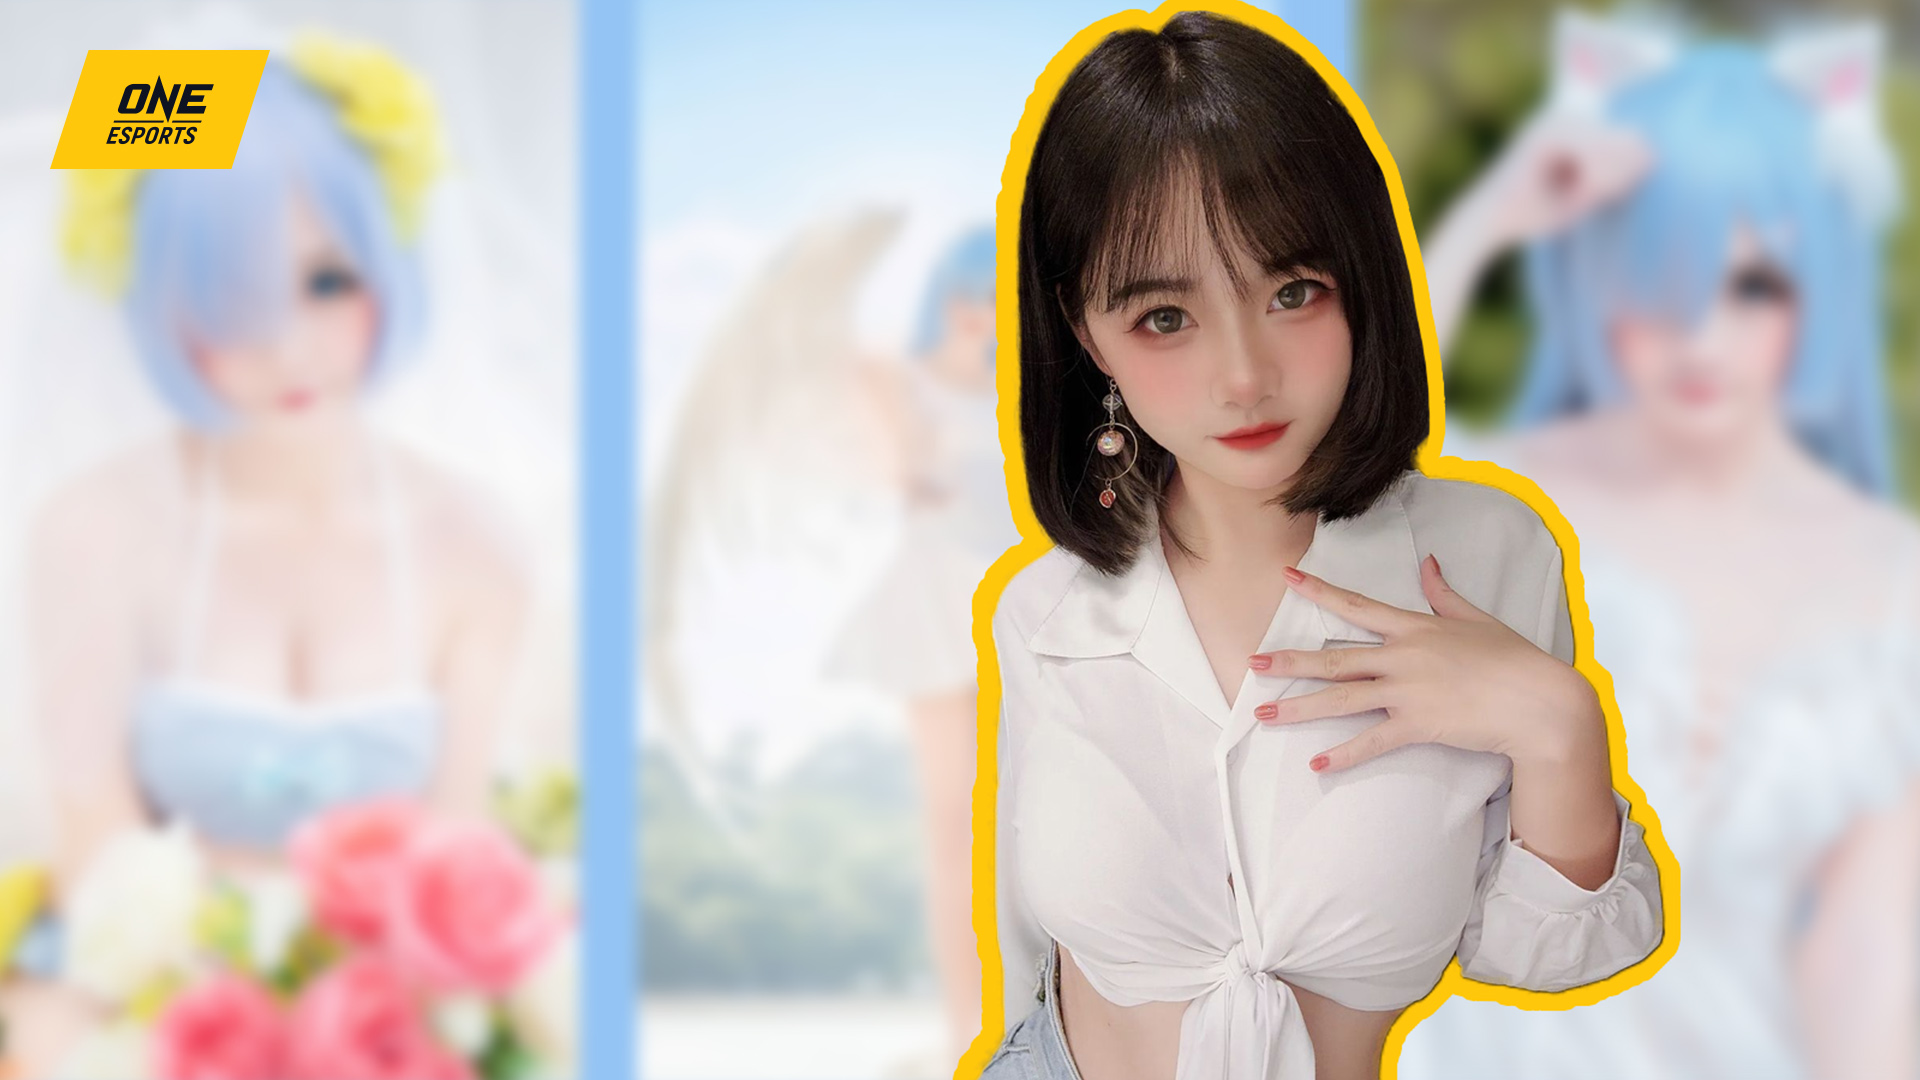 A New Anime Cosplay Girl from Vietnam is Getting Noticed! – UltraMunch